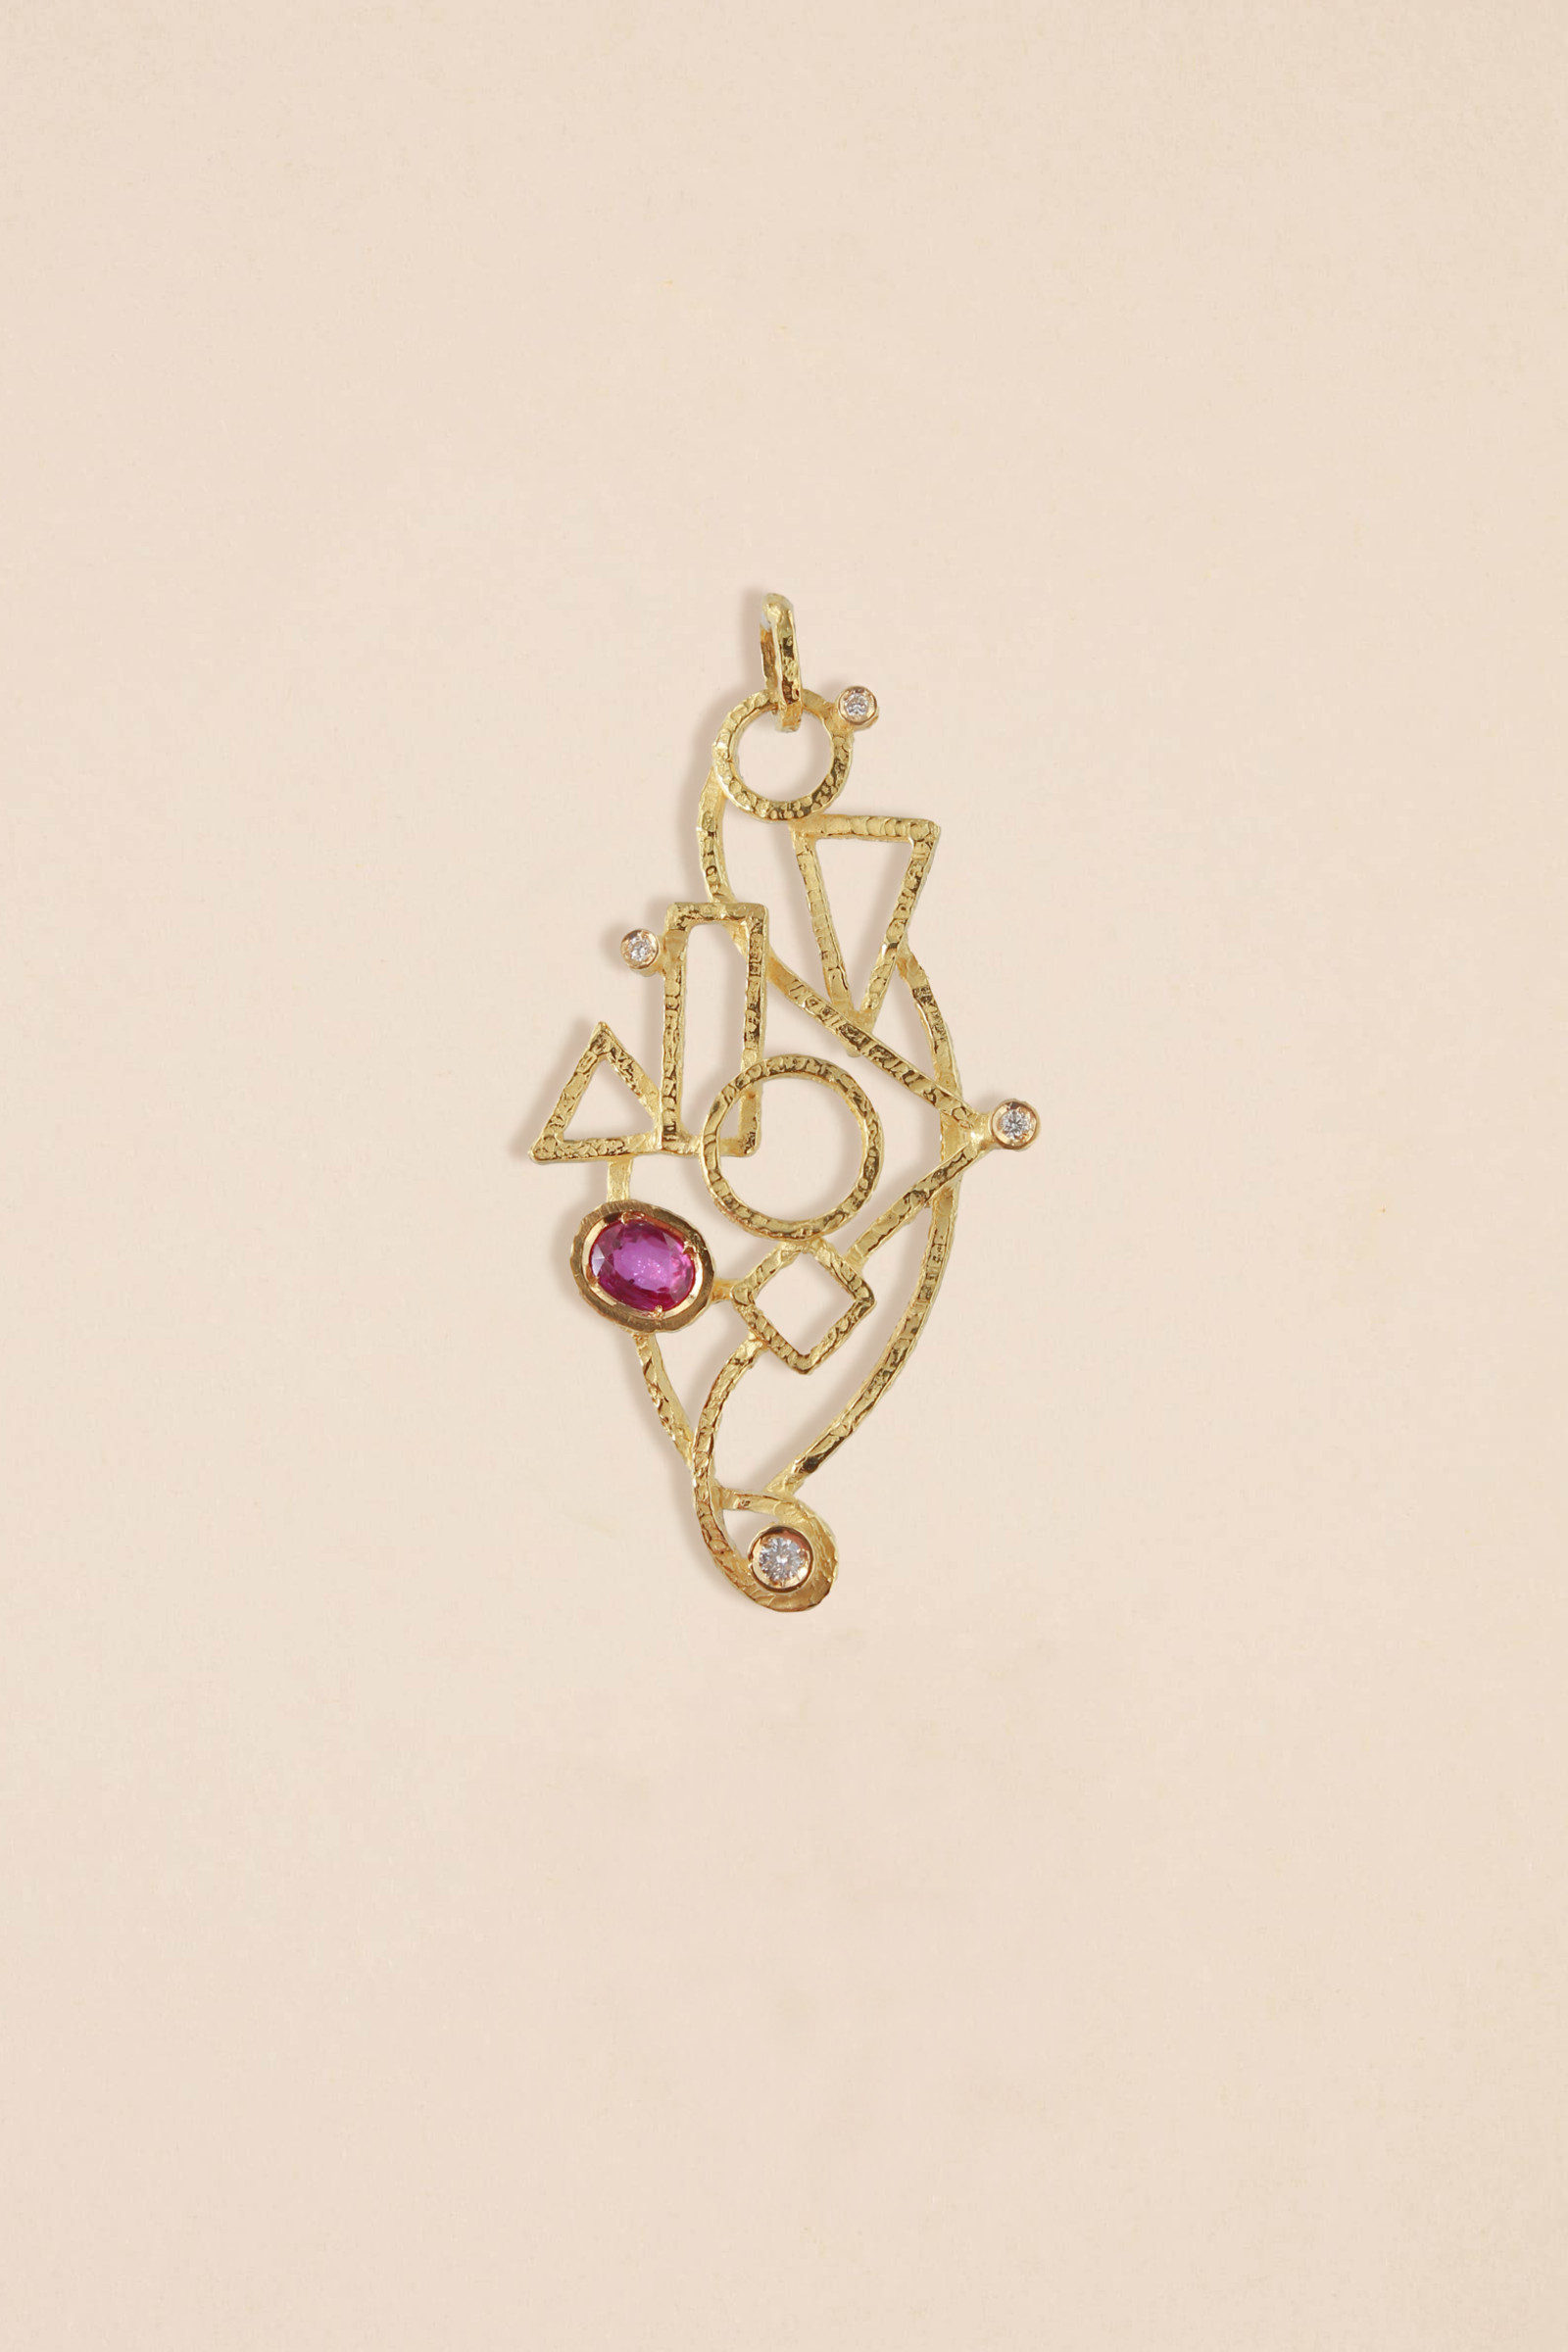 SH901A-18-Kt-Yellow-Gold-Pendant-with-Ruby-and-Diamonds-1